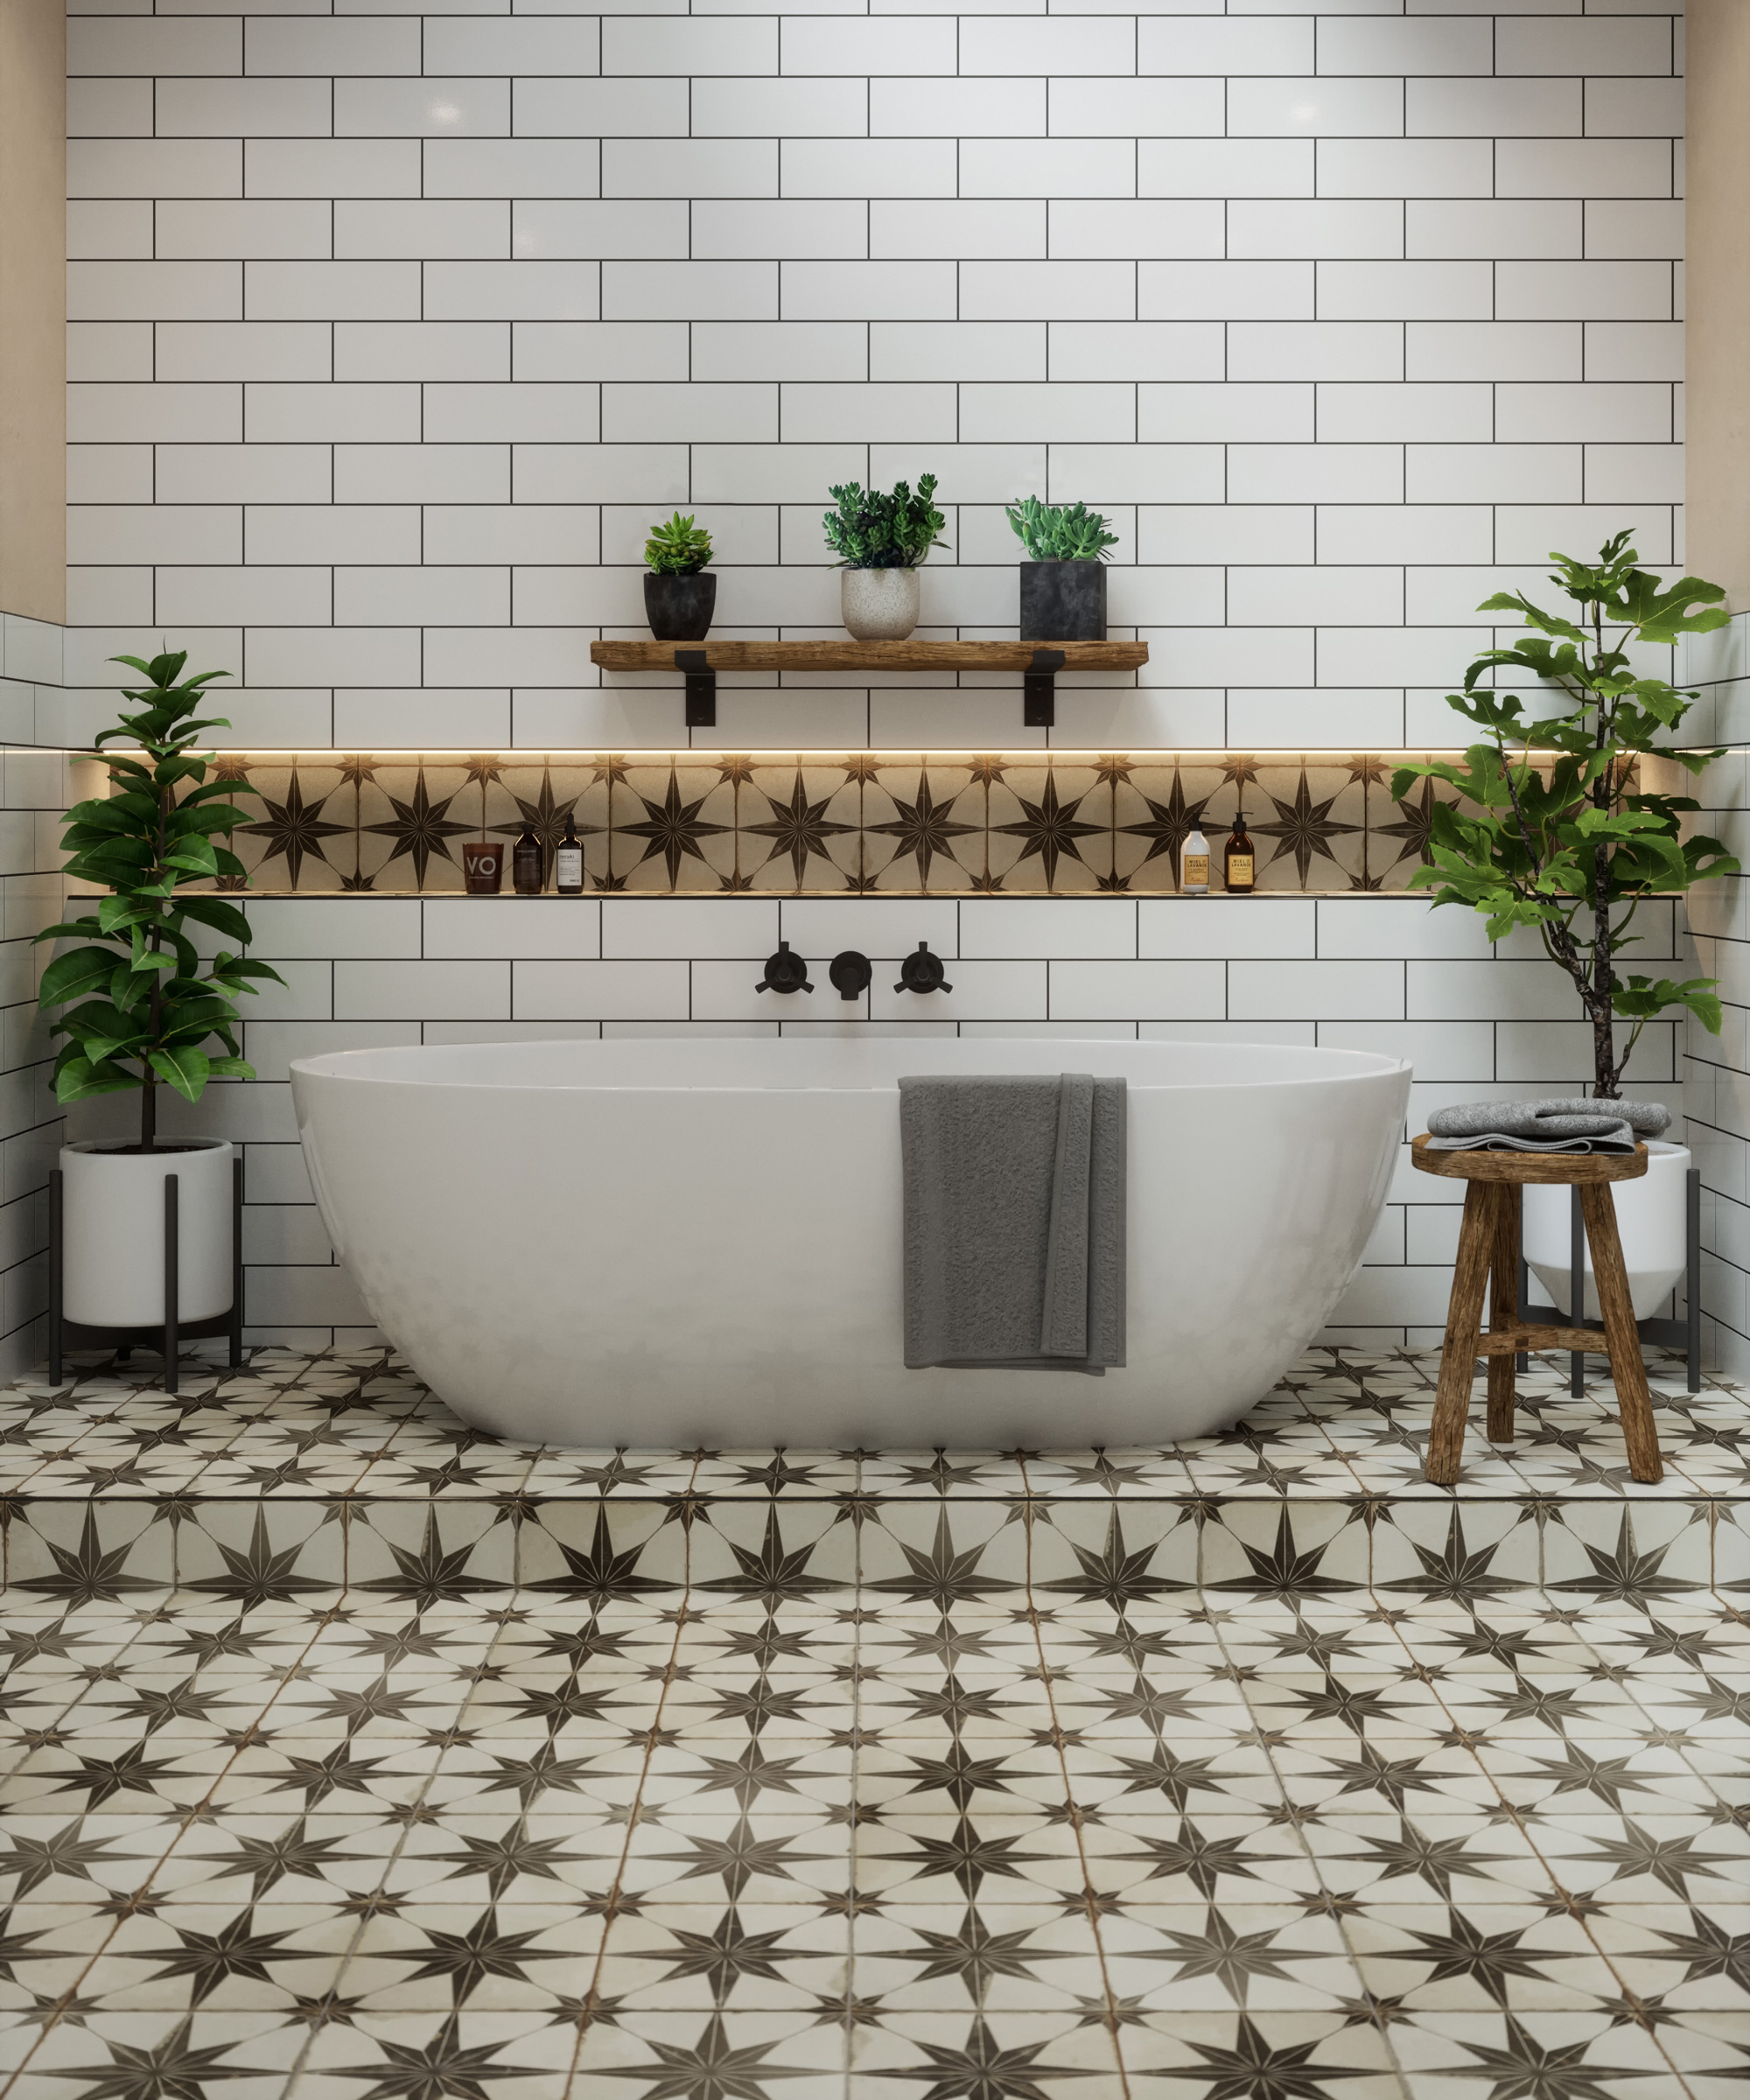 Bathroom Tile Ideas 32 New Looks To Inspire A Makeover Real Homes Bathroom tile popular info